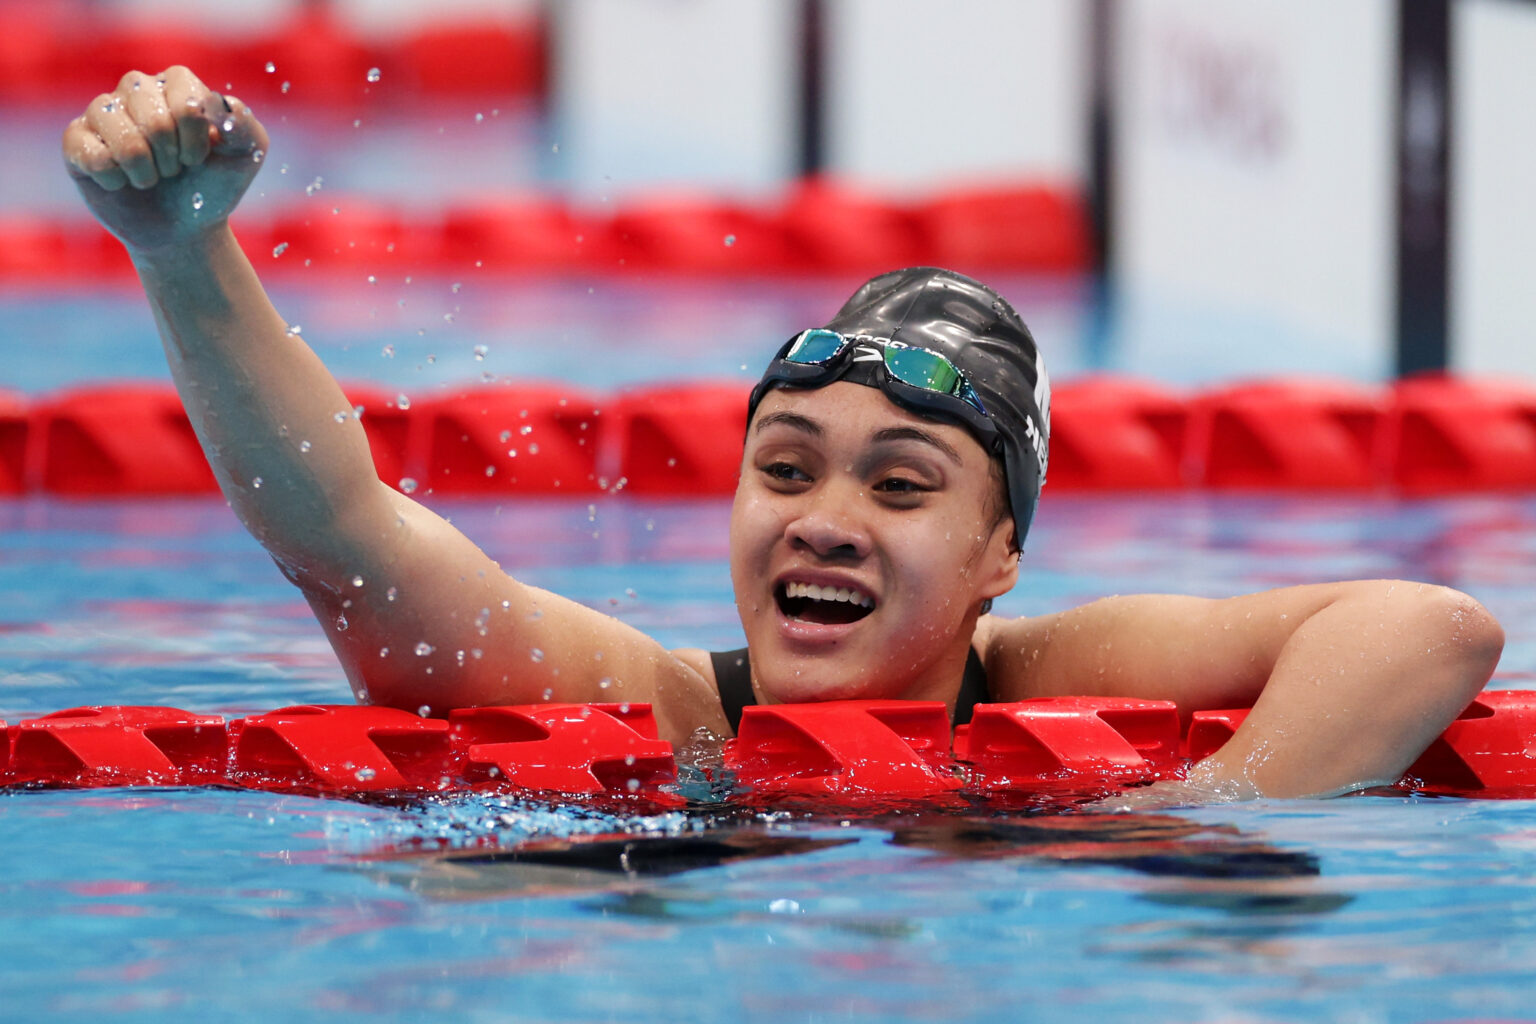 Tupou Neiufi winning the gold medal in the women's 100m backstroke at the Tokyo 2020 Paralympic Games